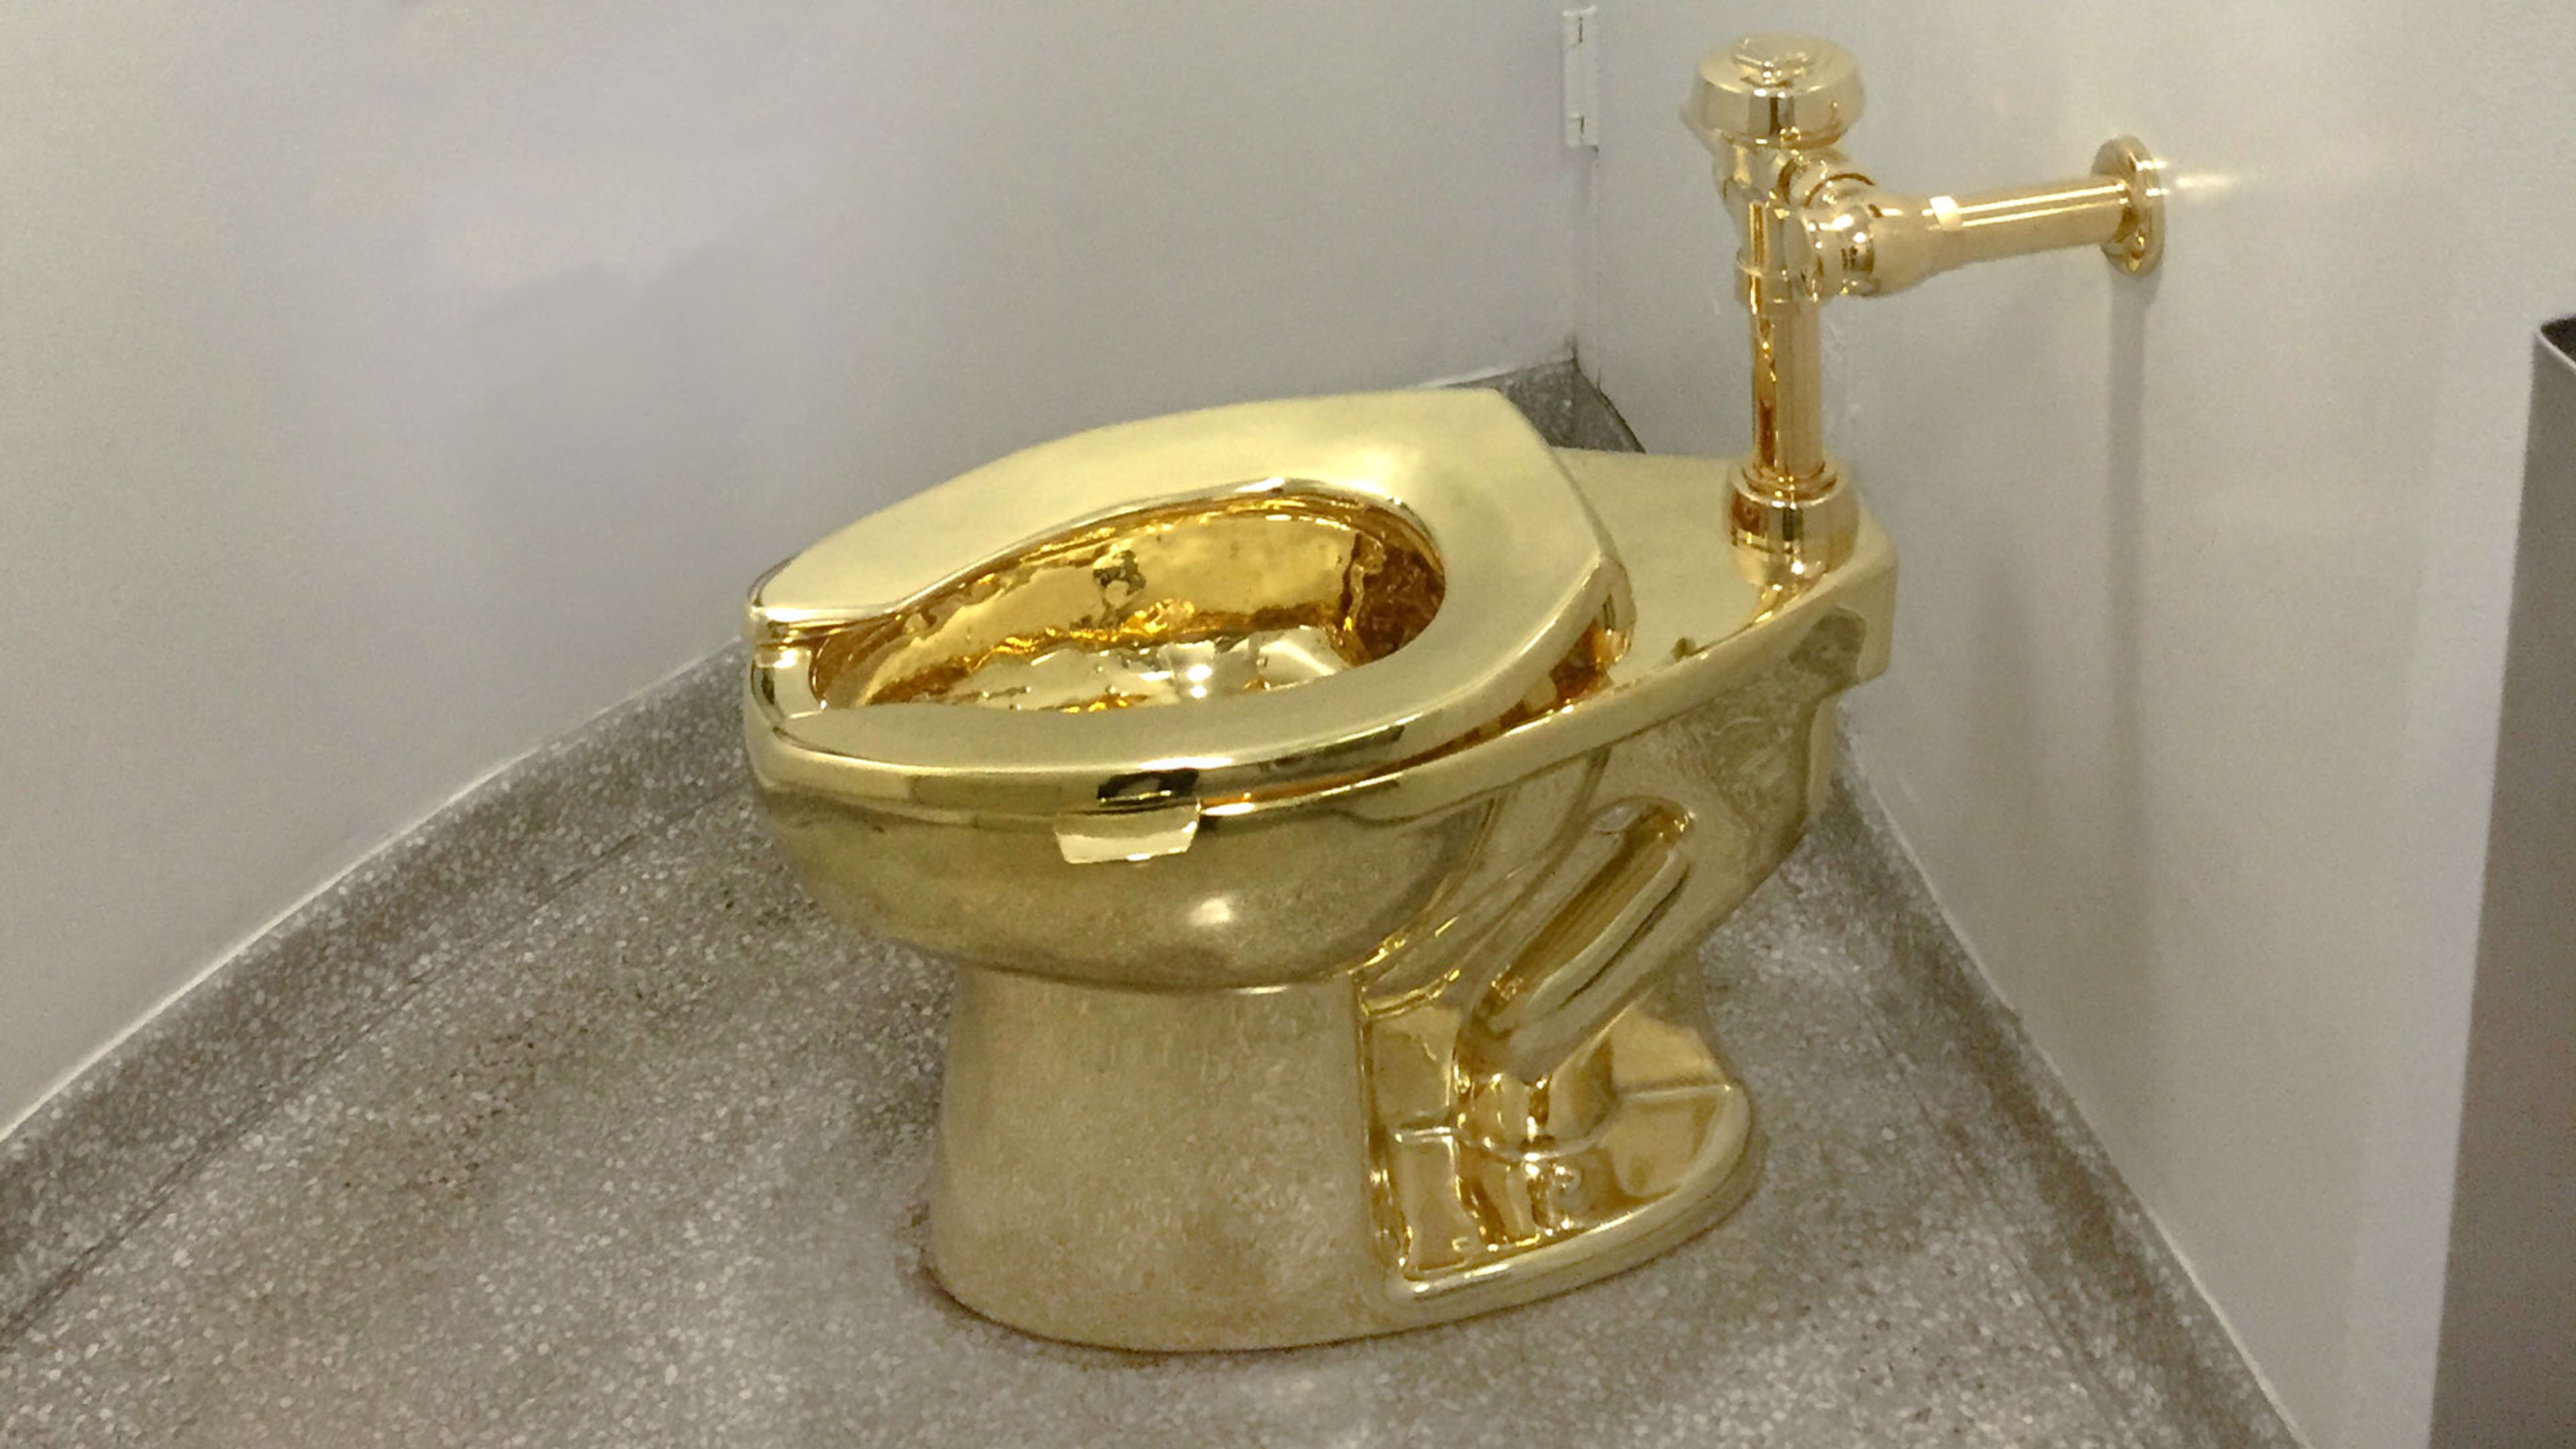 Trump Asked To Borrow A Van Gogh, Guggenheim Offered A Golden Toilet Instead